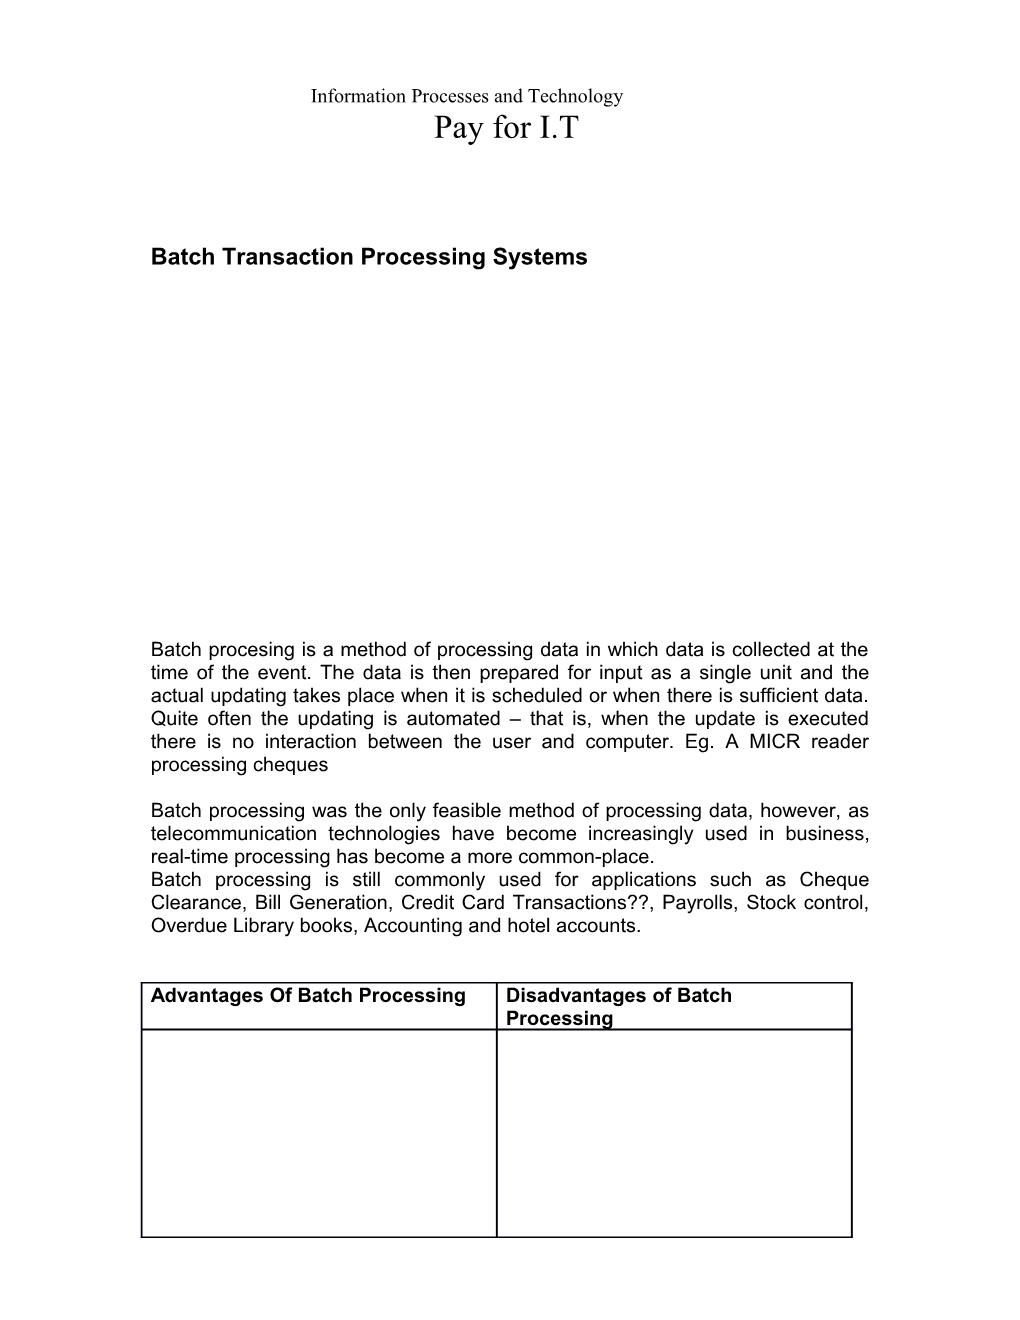 Batch Transaction Processing Systems